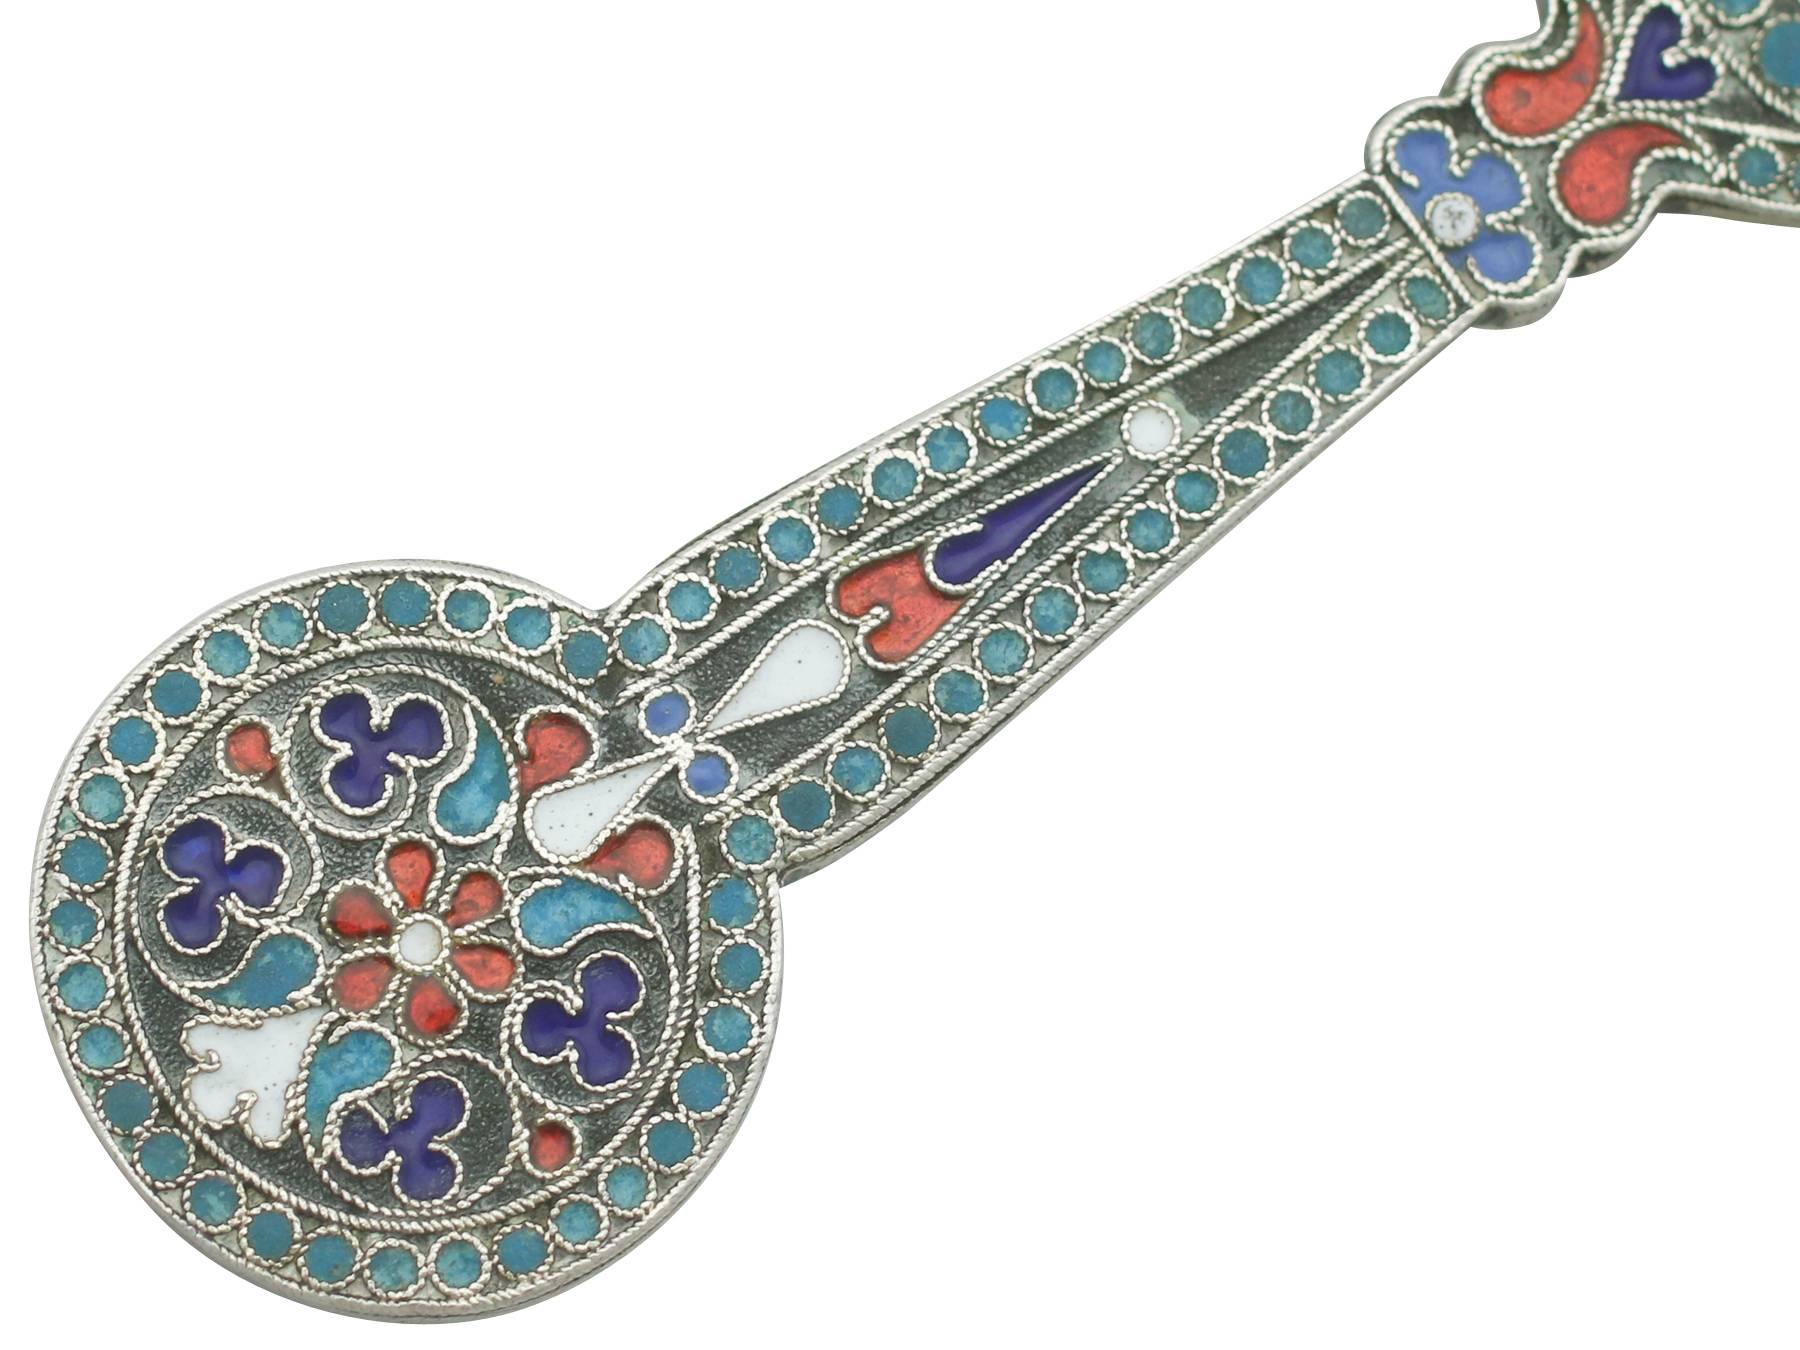 Late 19th Century 1890s Antique Russian Silver and Polychrome Cloisonne Enamel Tea Strainer